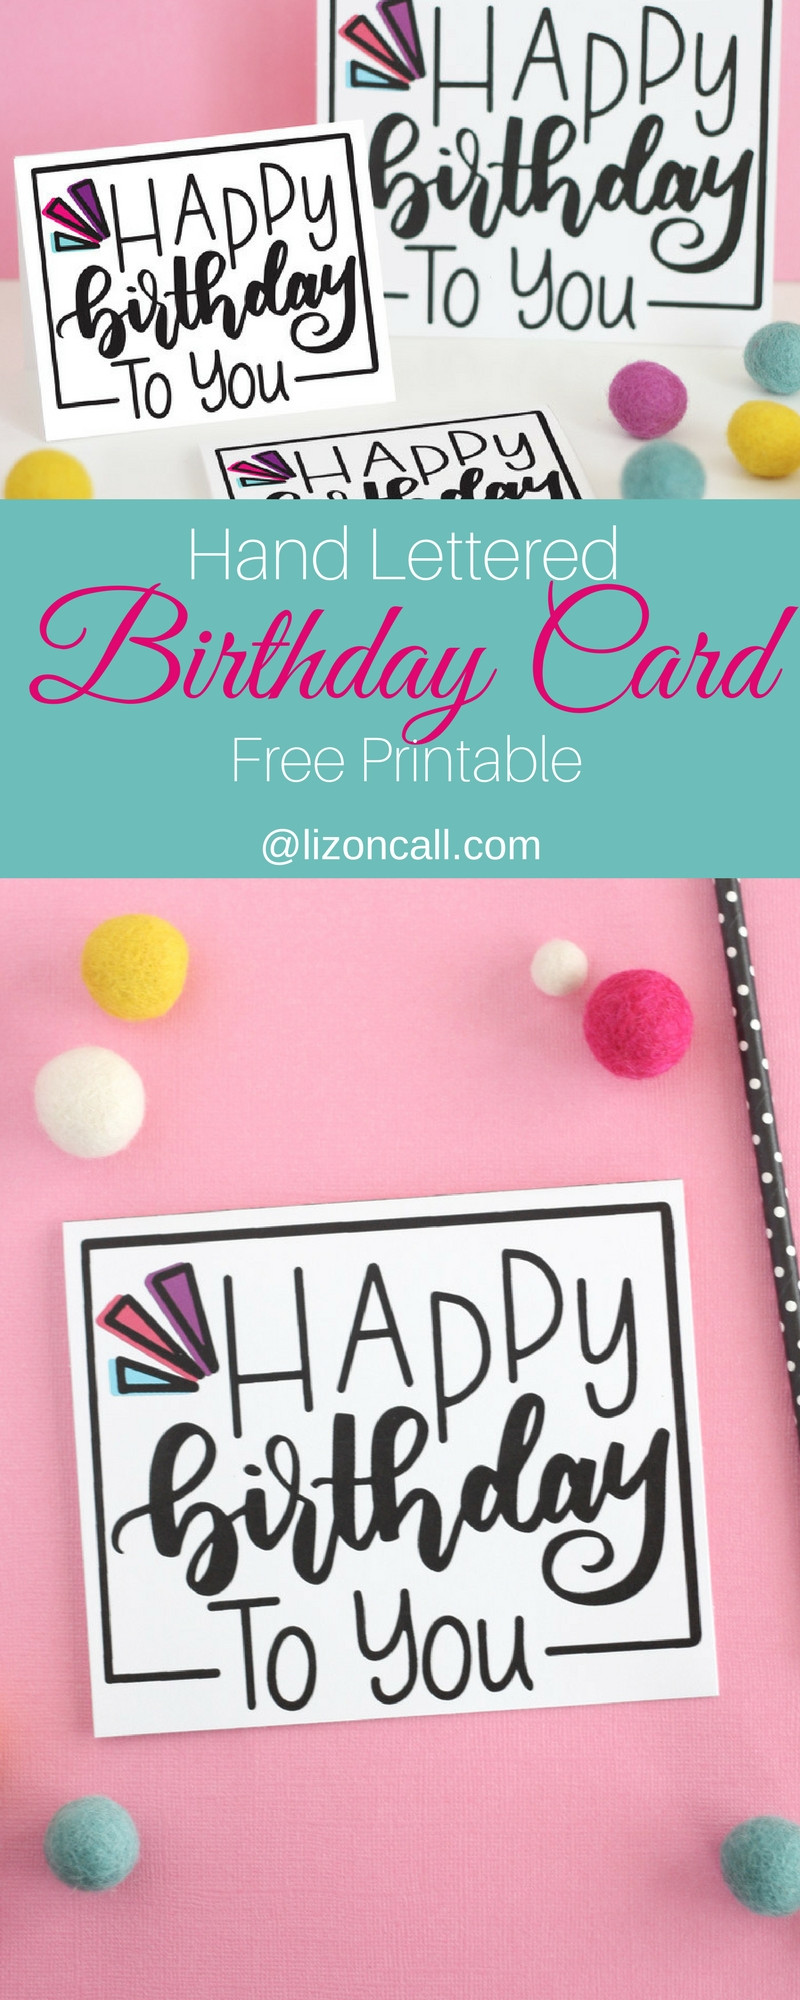 Birthday Card Online Free
 Hand Lettered Free Printable Birthday Card Liz on Call